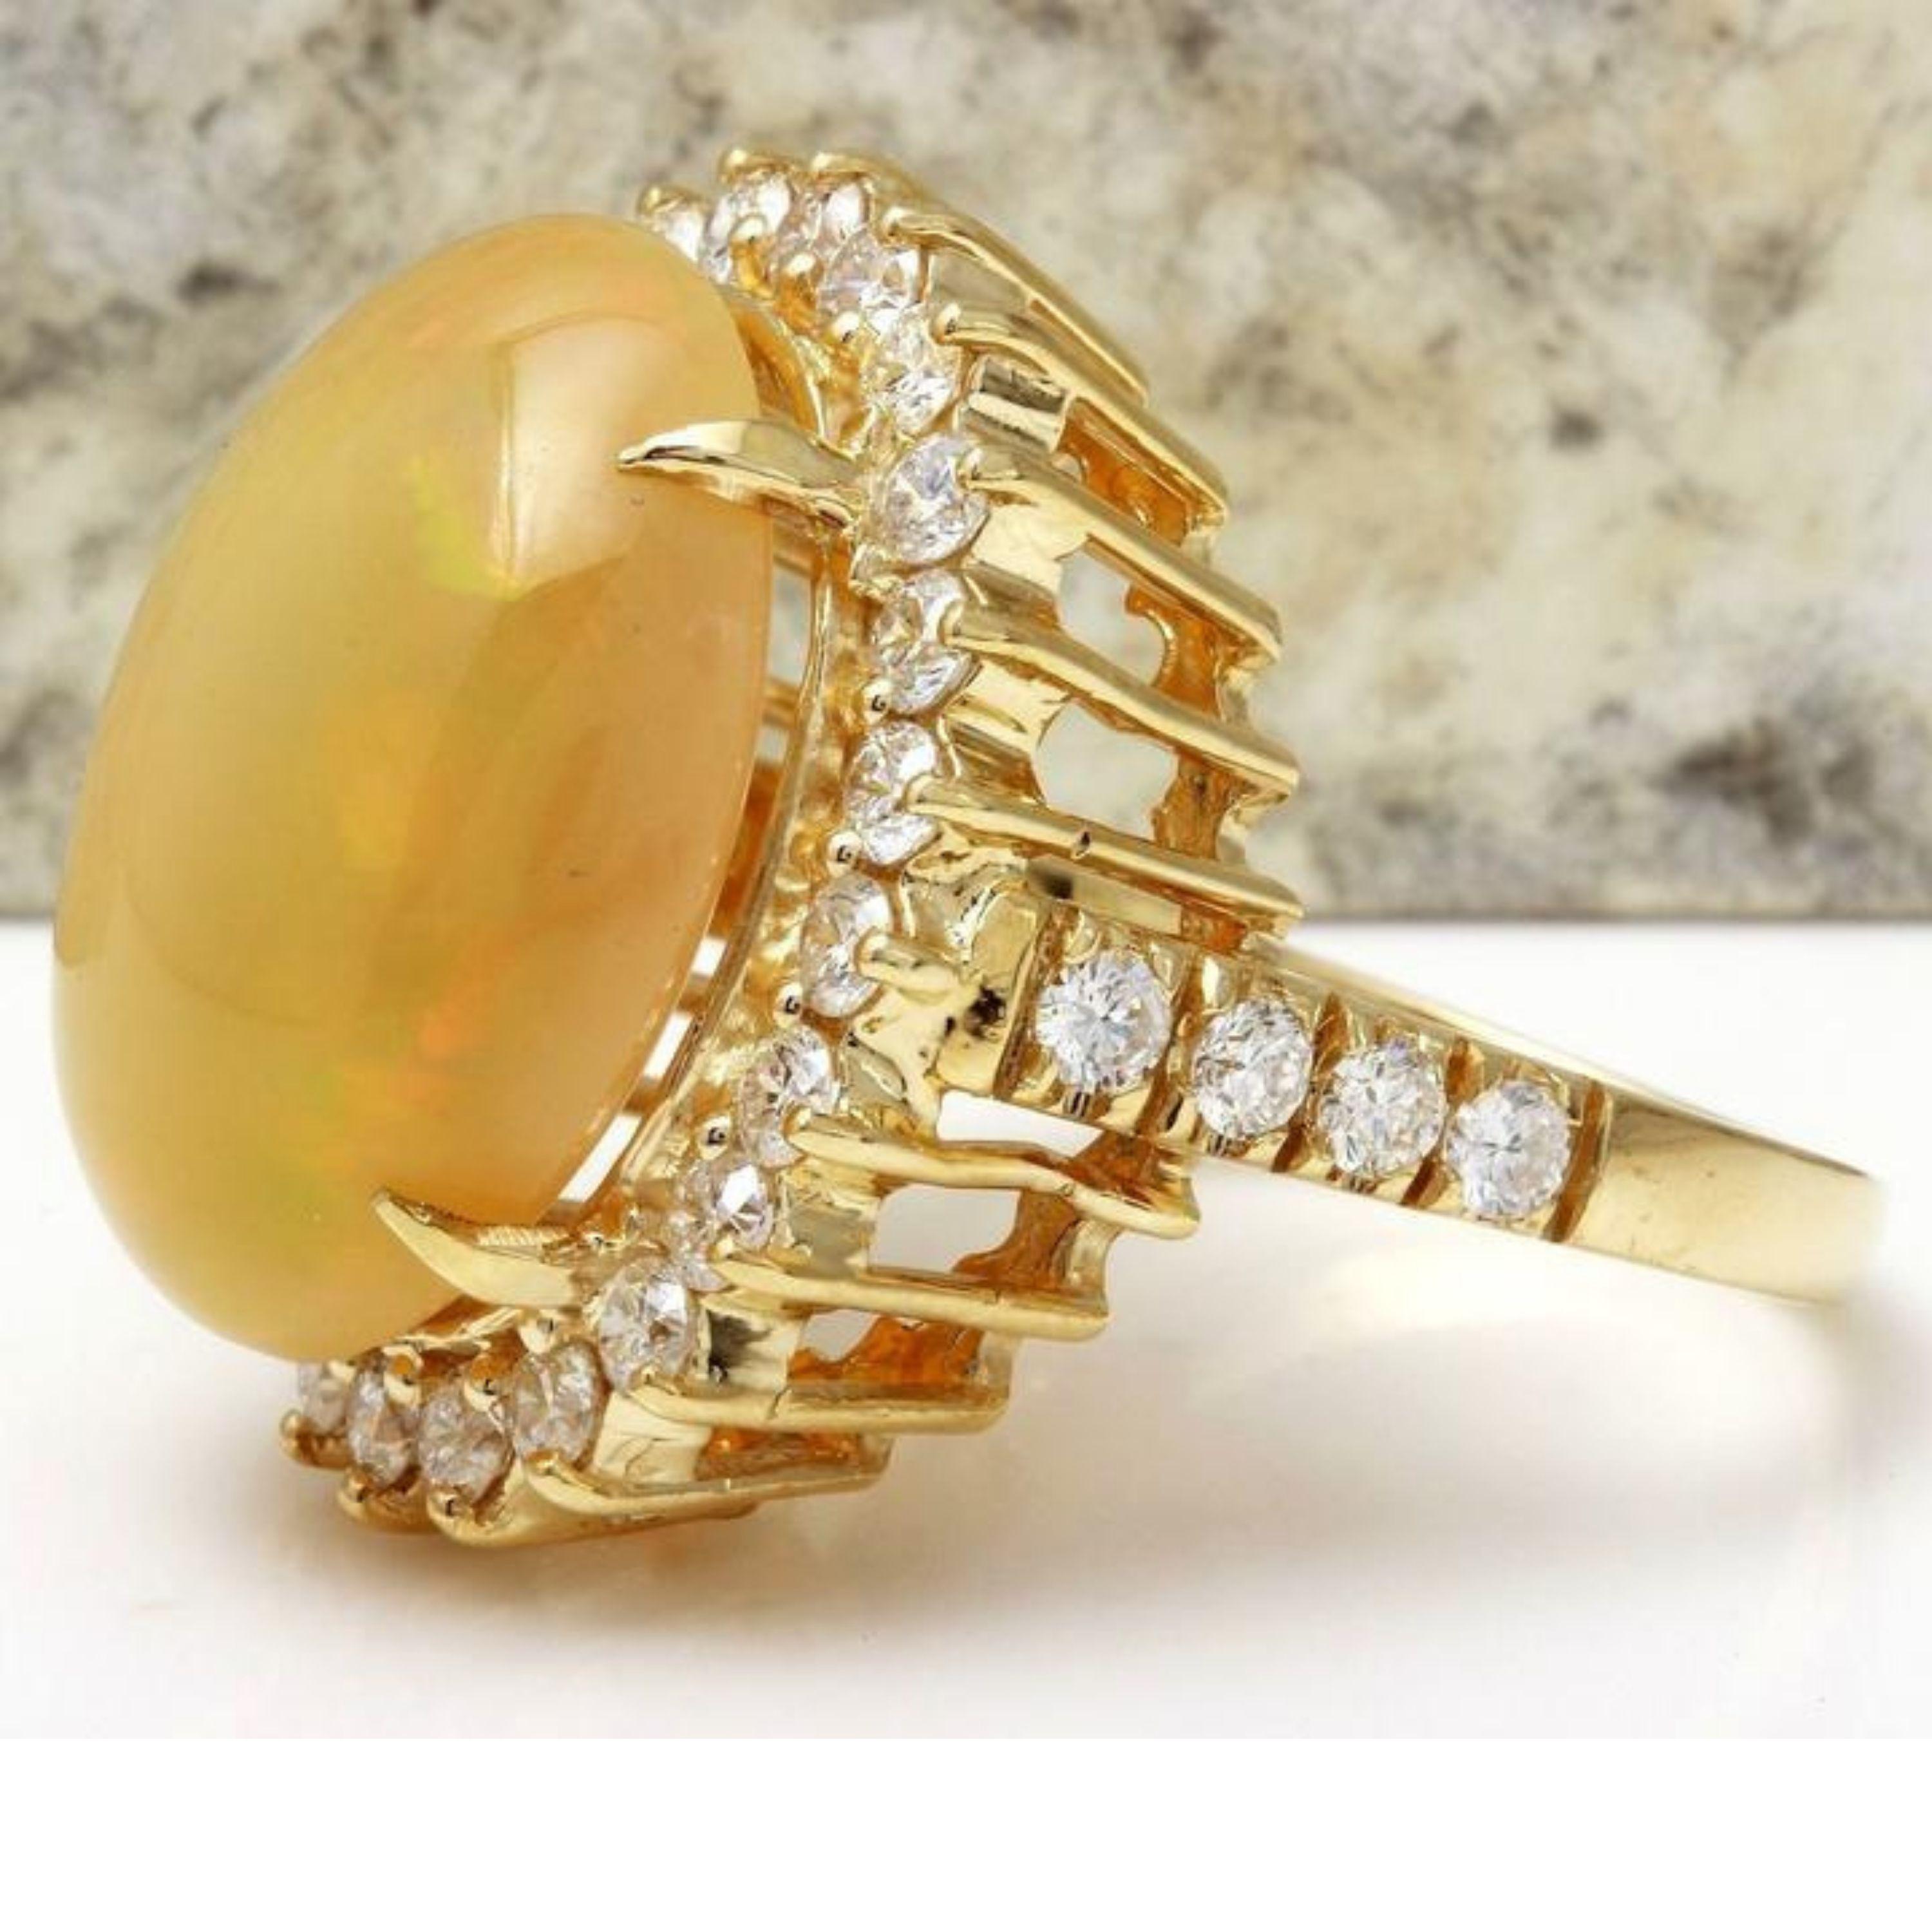 10.50 Carats Natural Impressive Ethiopian Opal and Diamond 14K Solid Yellow Gold Ring

Total Natural Opal Weight is: 8.50 Carats

Opal Measures: 13.48x 10.00mm

The head of the ring measures: 18.77 x 14.73mm

Total Natural Round Diamonds Weight: